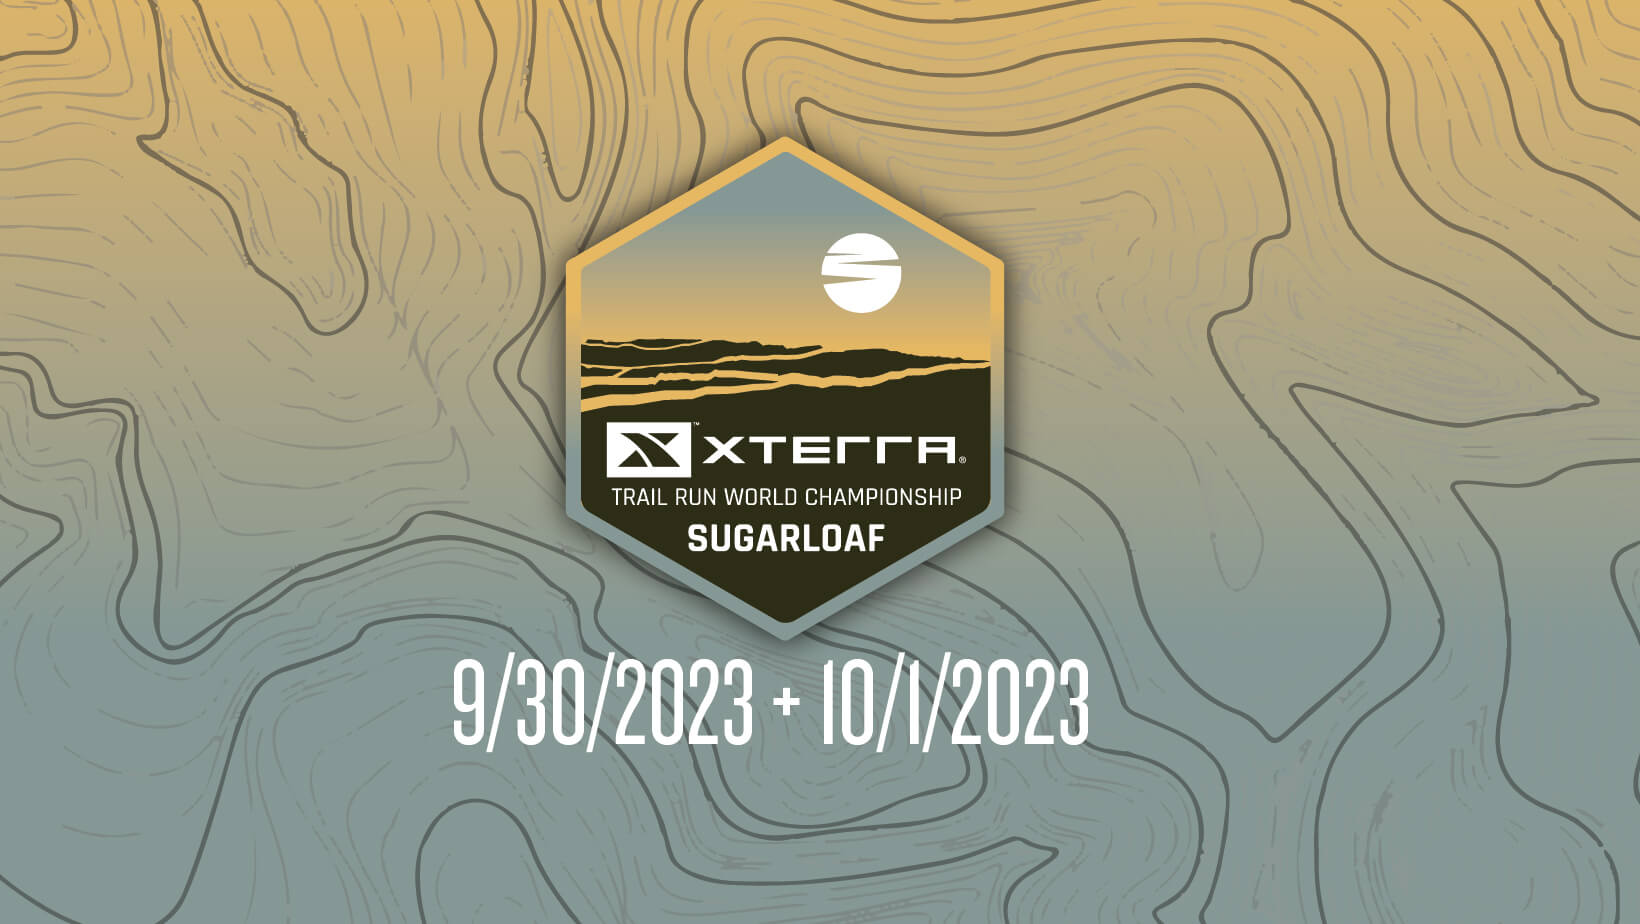 Image promoting the Xterra event at sugarloaf 9/30/23